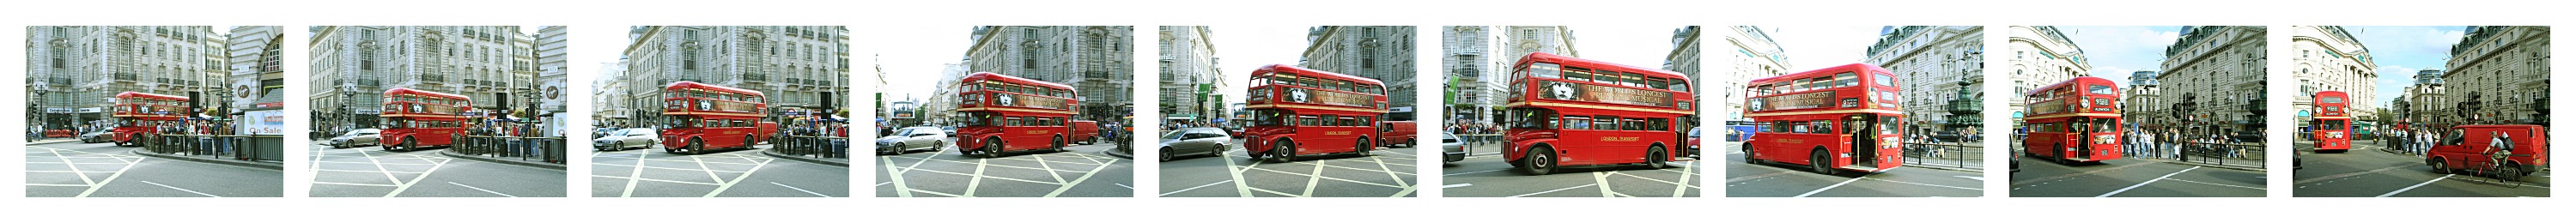 Routemaster am Piccadilly